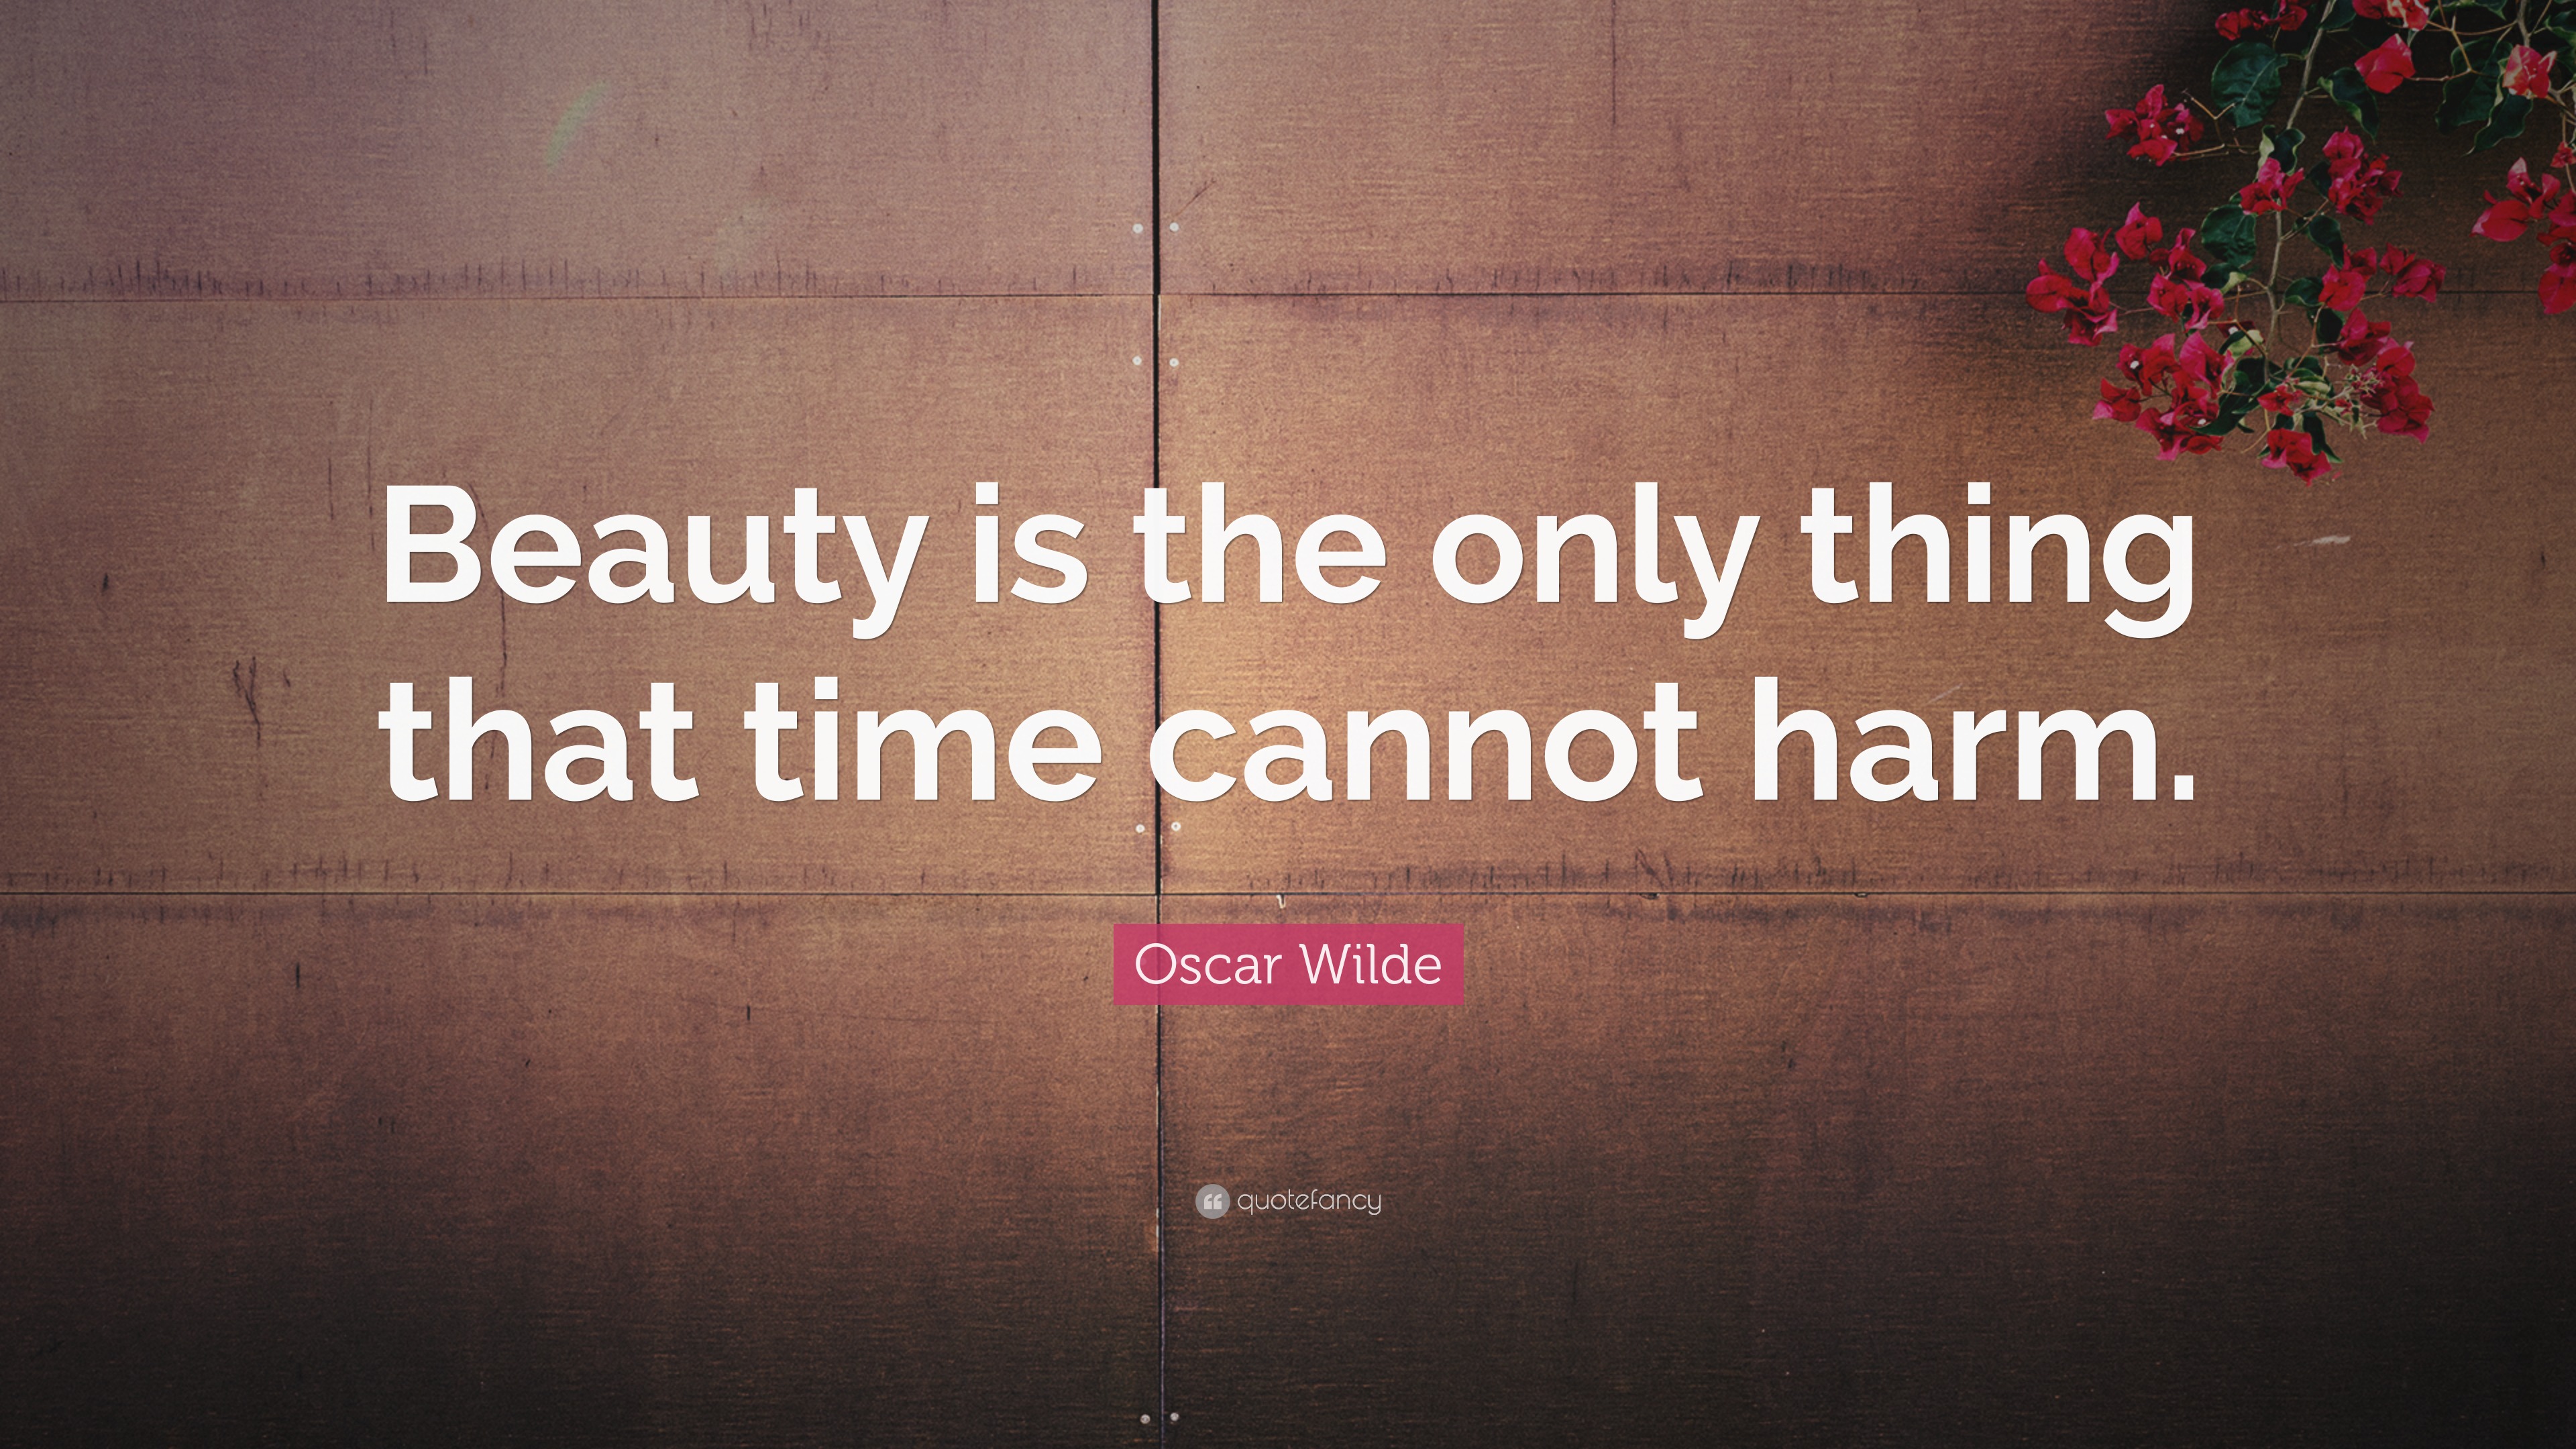 Oscar Wilde Quote: “Beauty is the only thing that time cannot harm.”